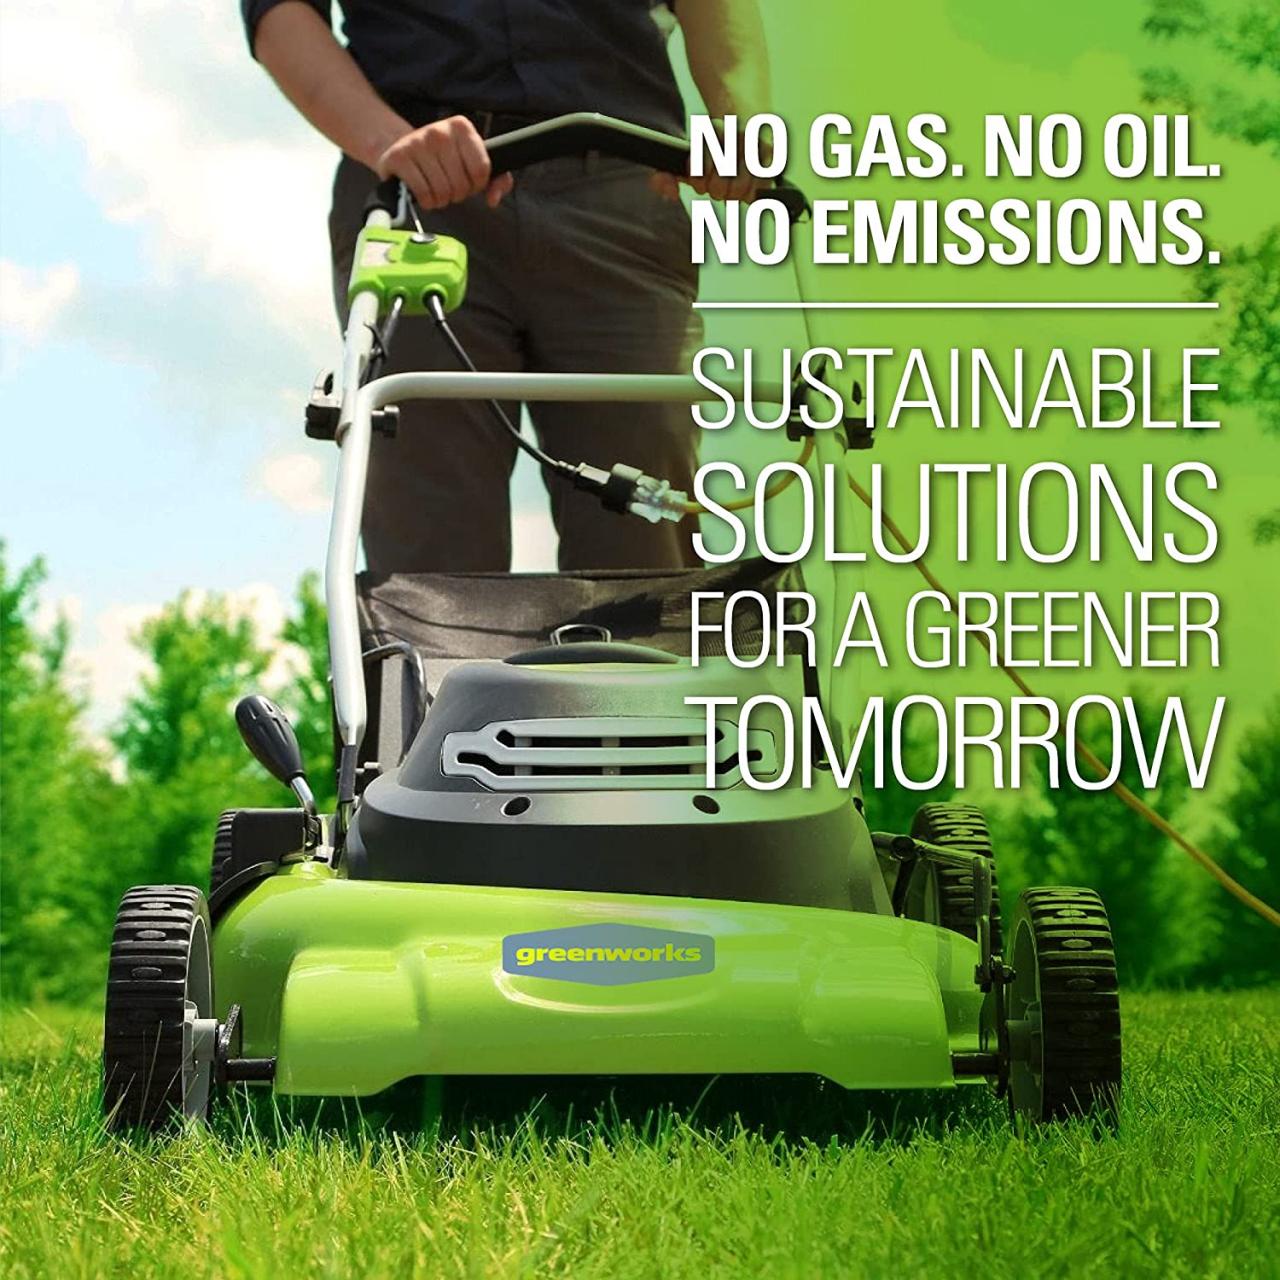 Buy Greenworks 13 Amp 21-Inch Electric Lawn Mower, MO13B00 Online in  Vietnam. B01MZACNKY